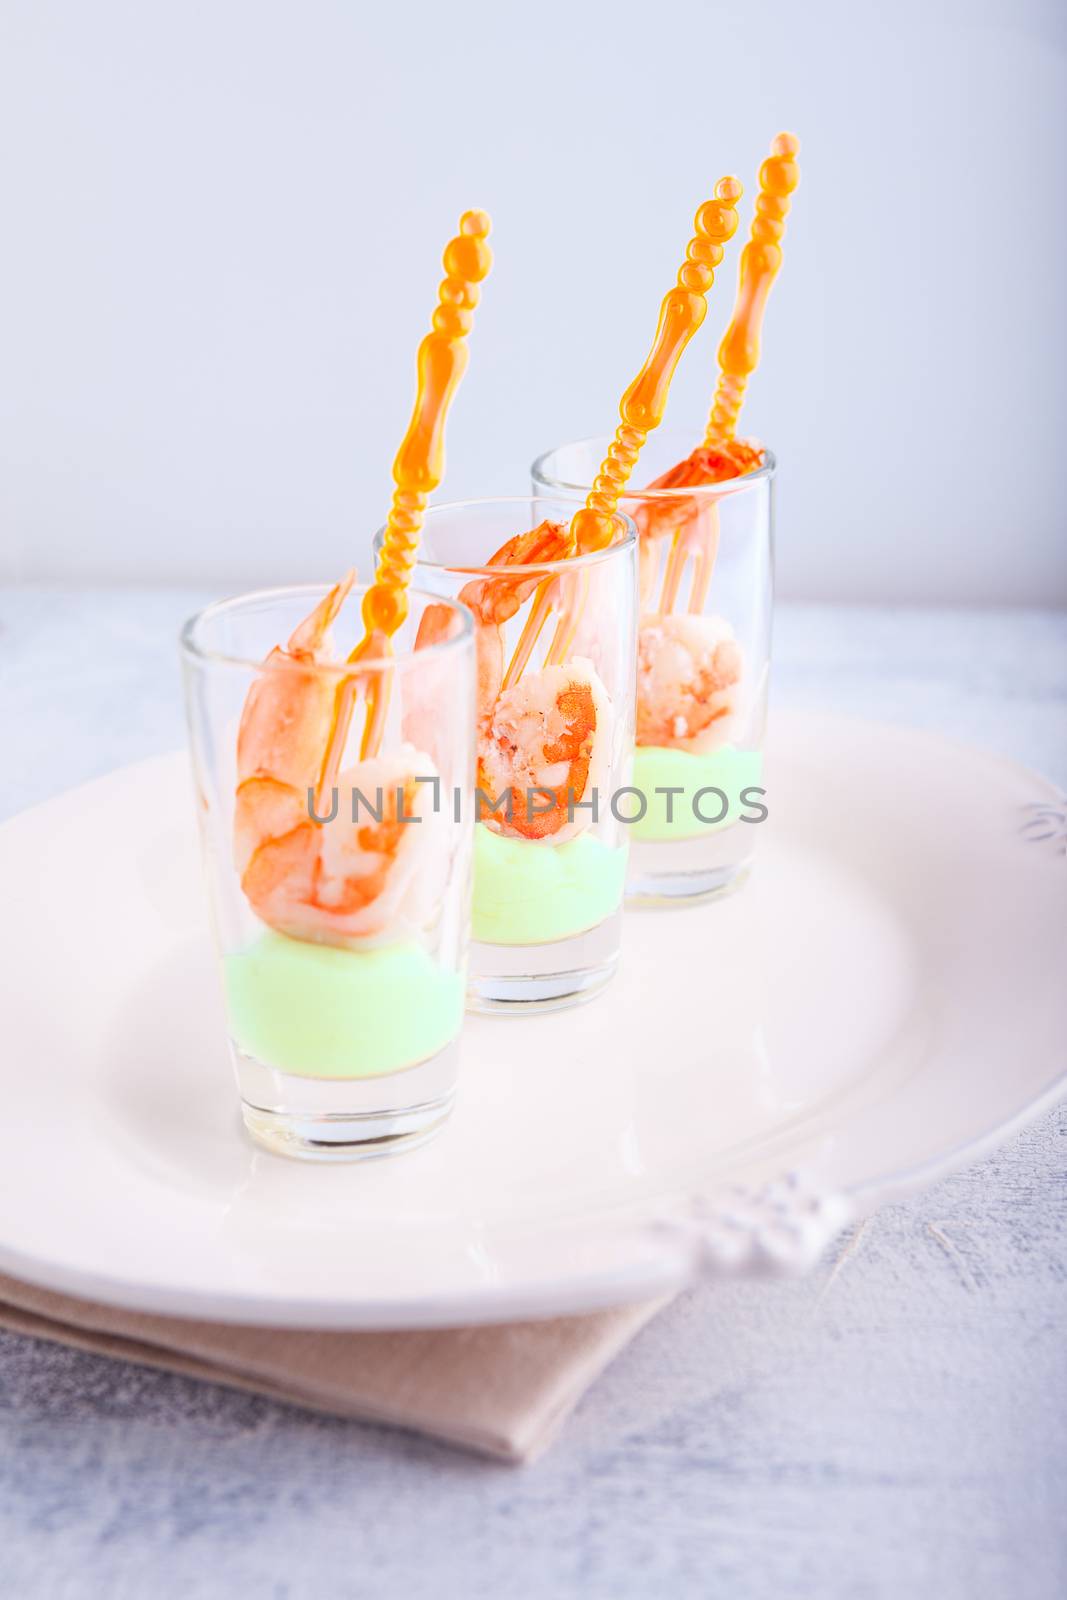 Shrimp with avocado yogurt  in a glass  by supercat67